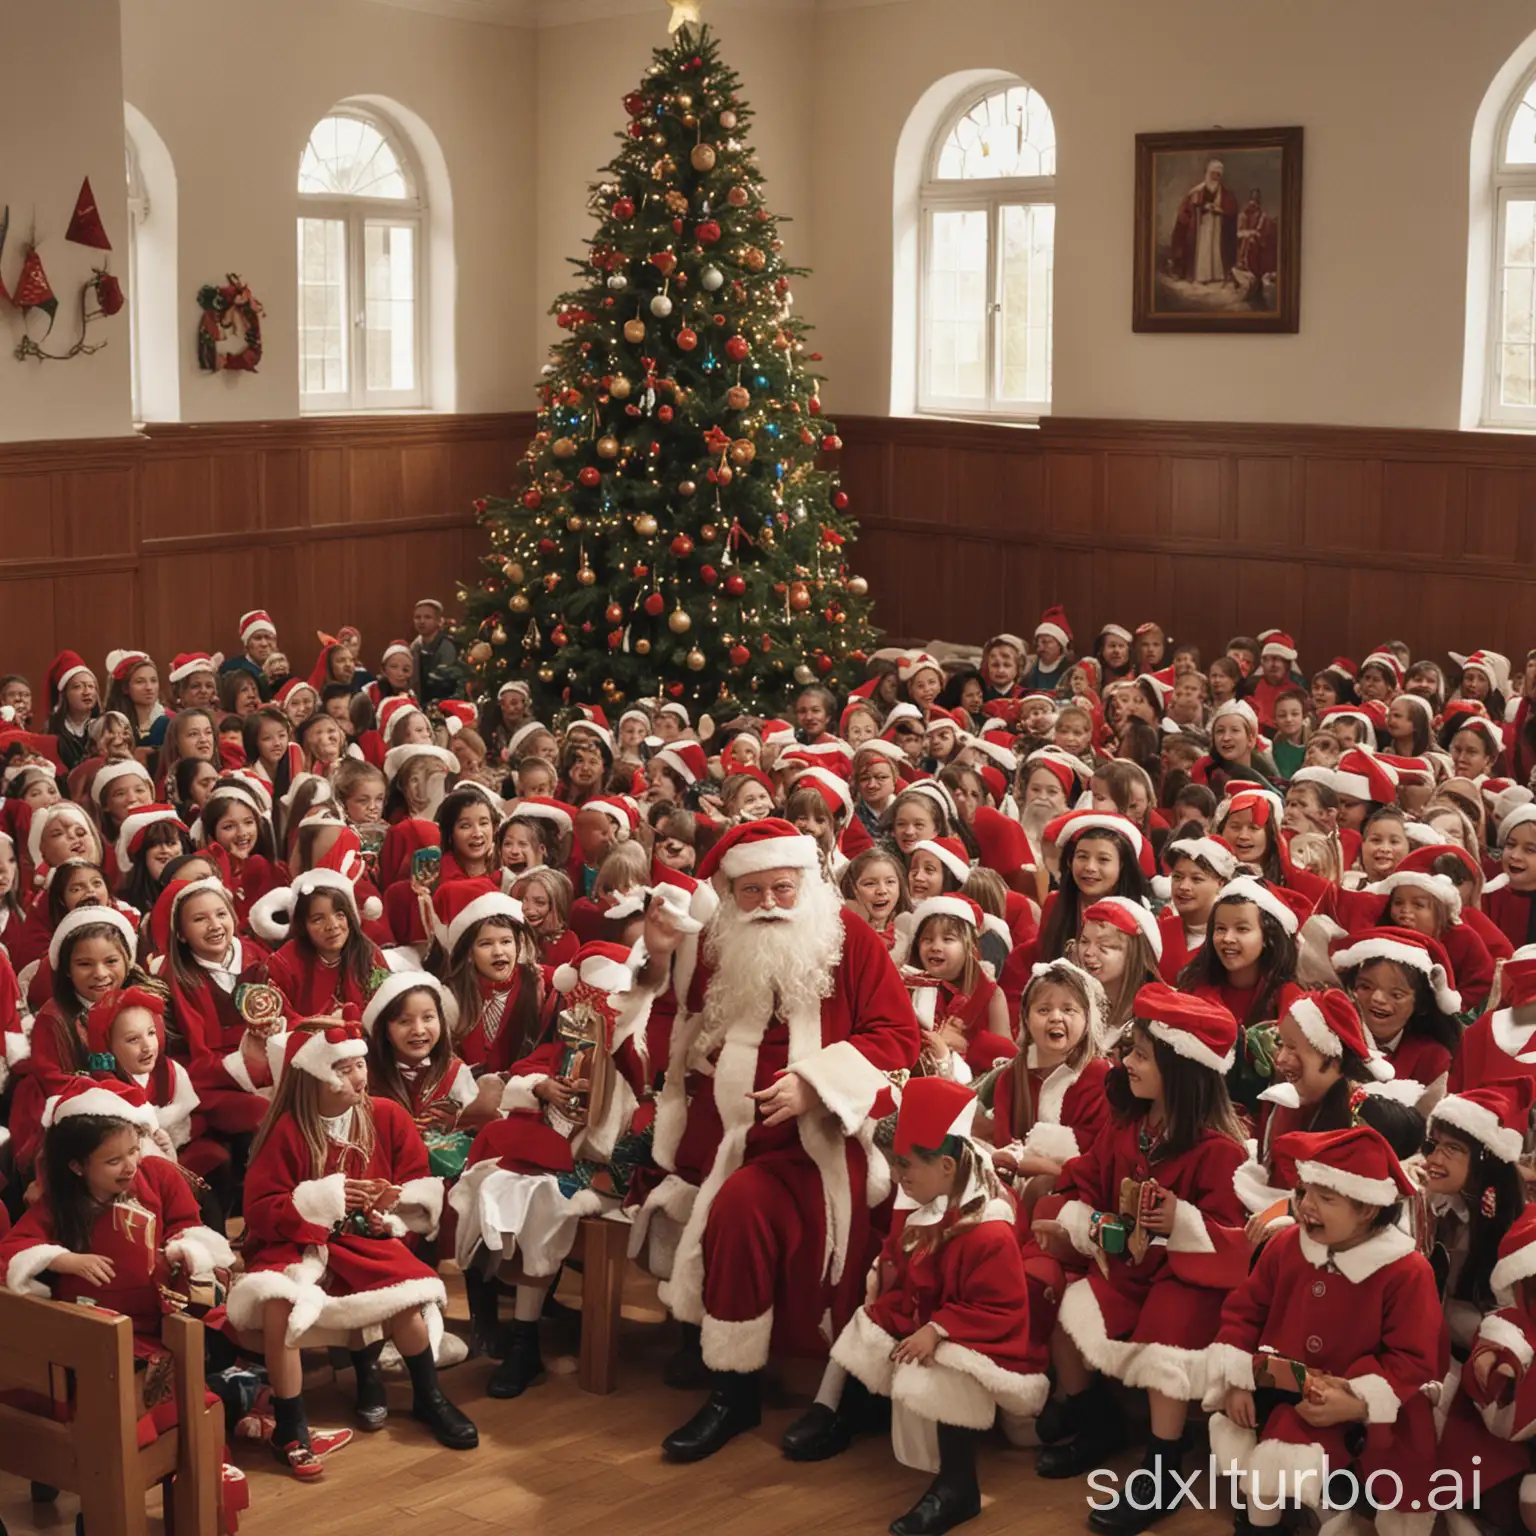 Santa-Claus-Surprises-Excited-Students-with-Christmas-Gifts-at-Festive-School-Party